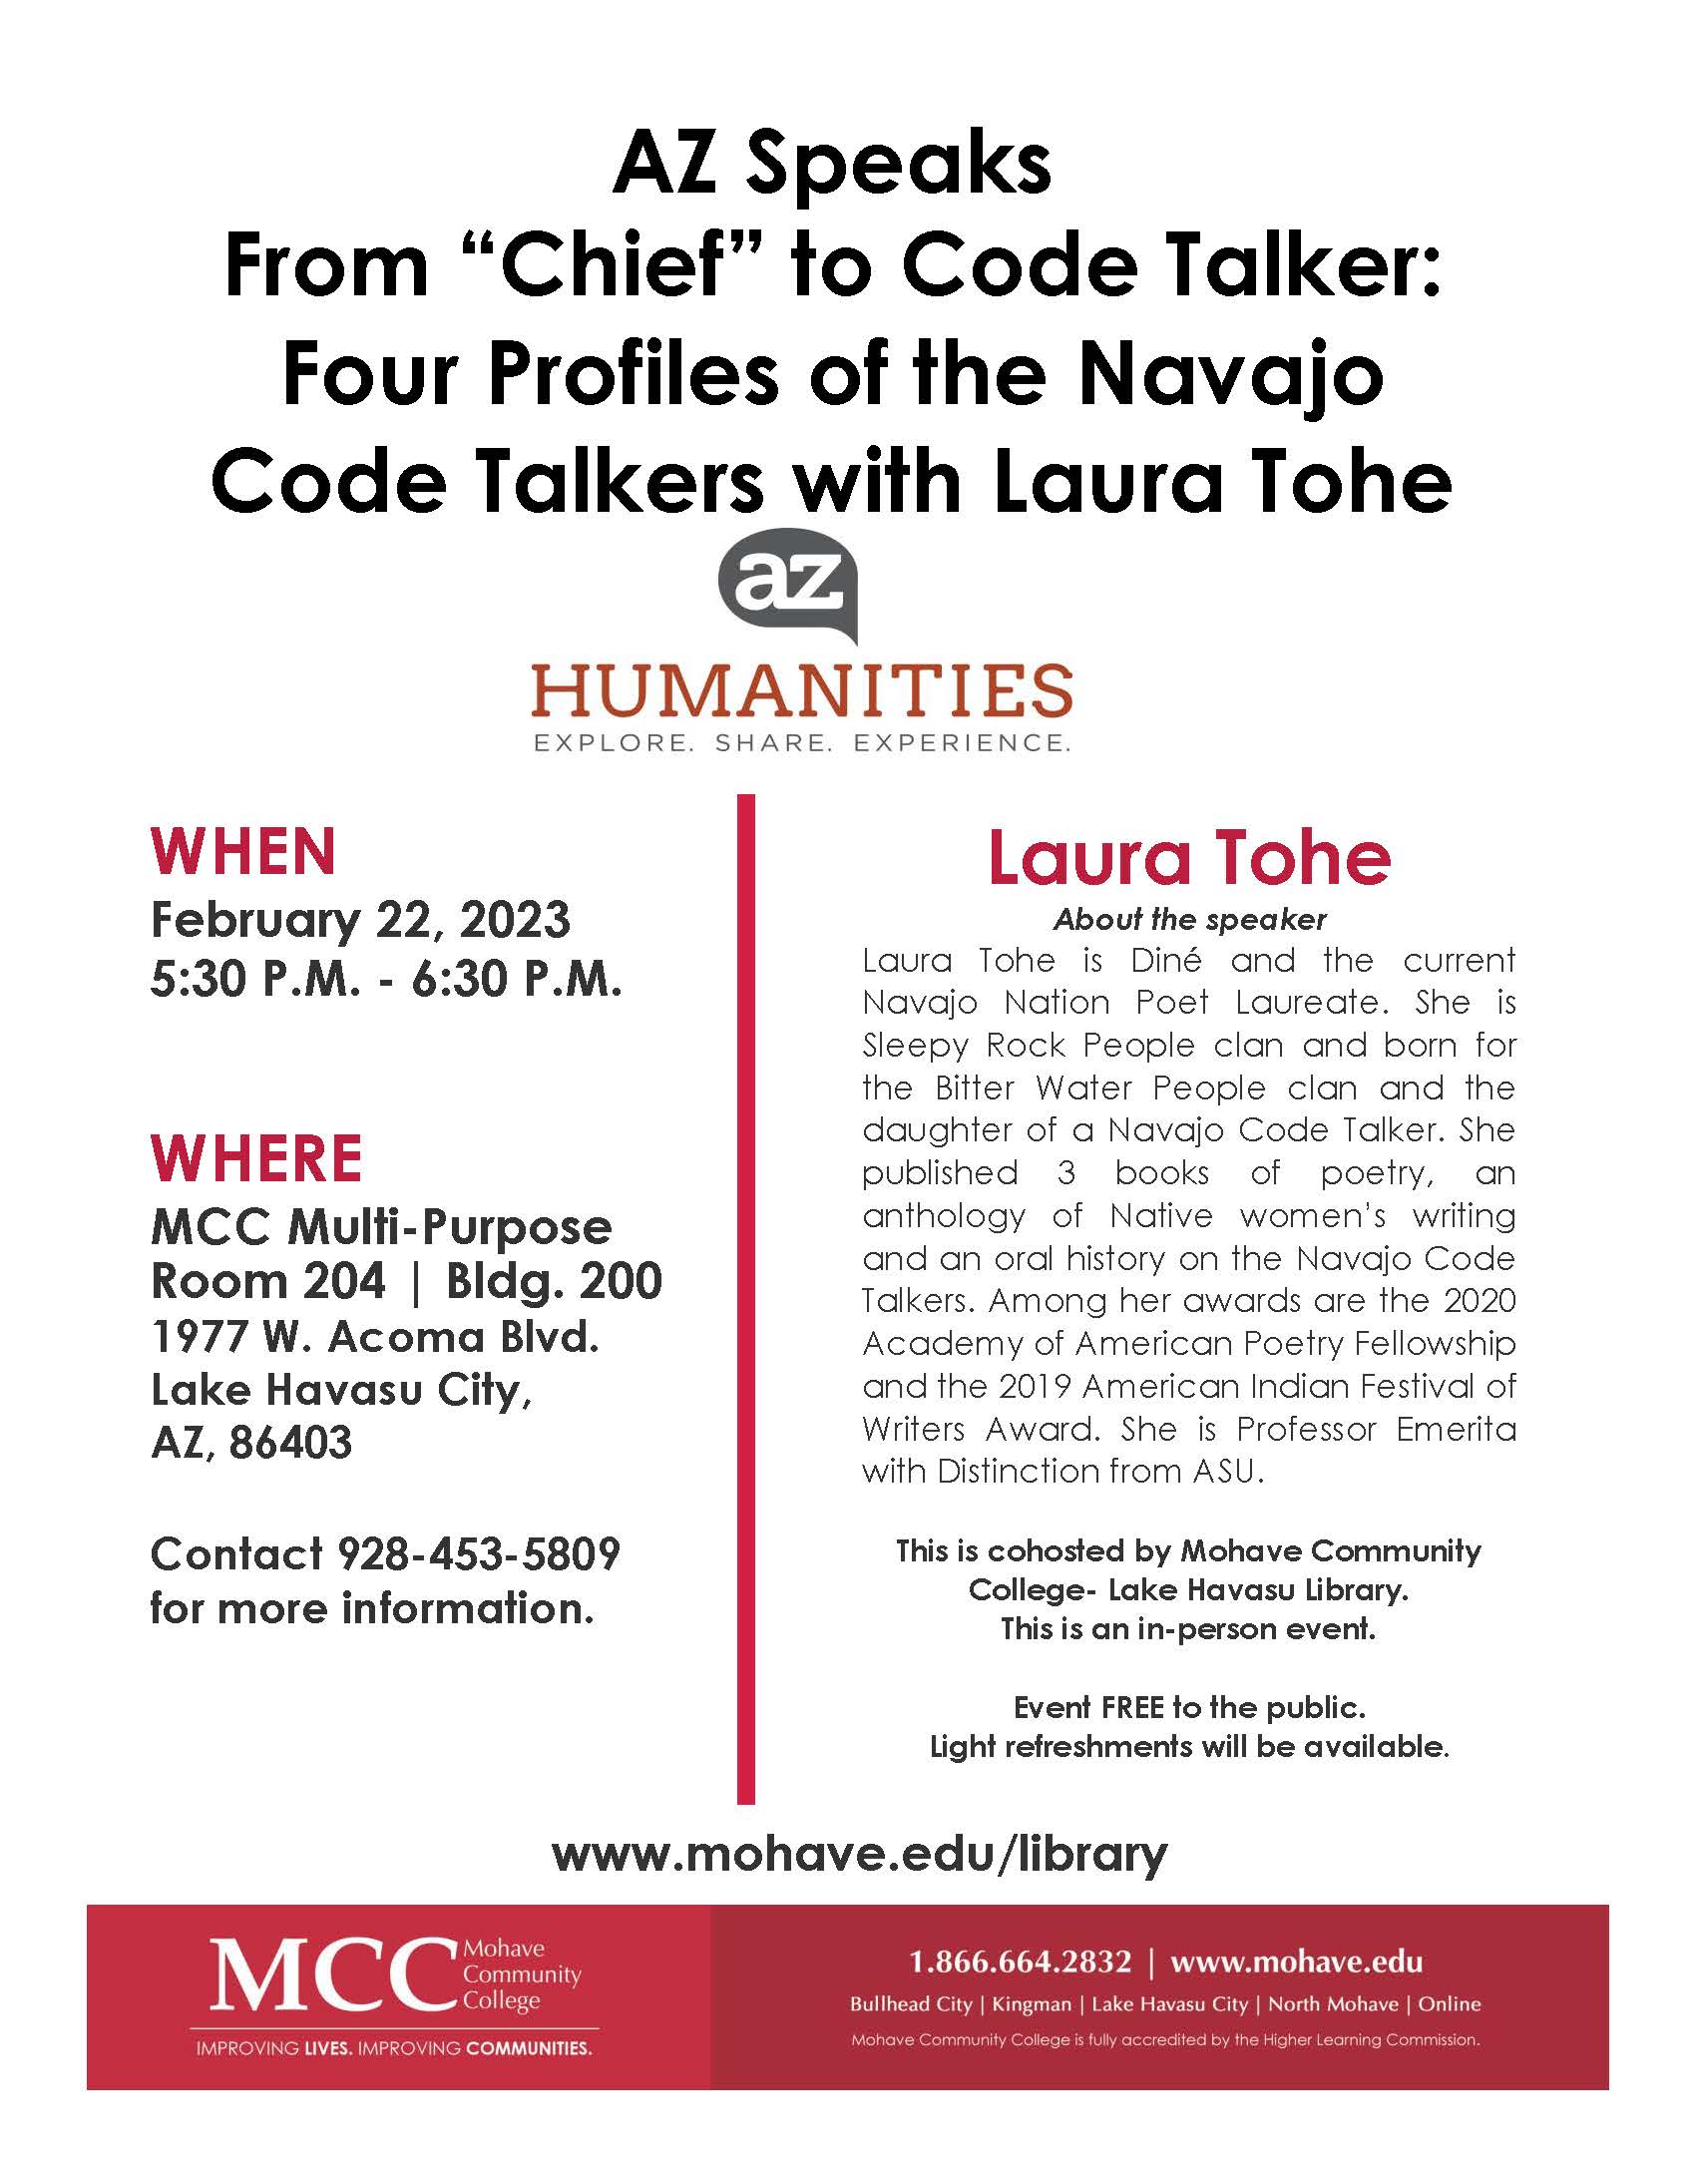 AZ Speaks – “From ‘Chief’ to Code Talker: Four Profiles of the Navajo Code Talkers” presented by Laura Tohe